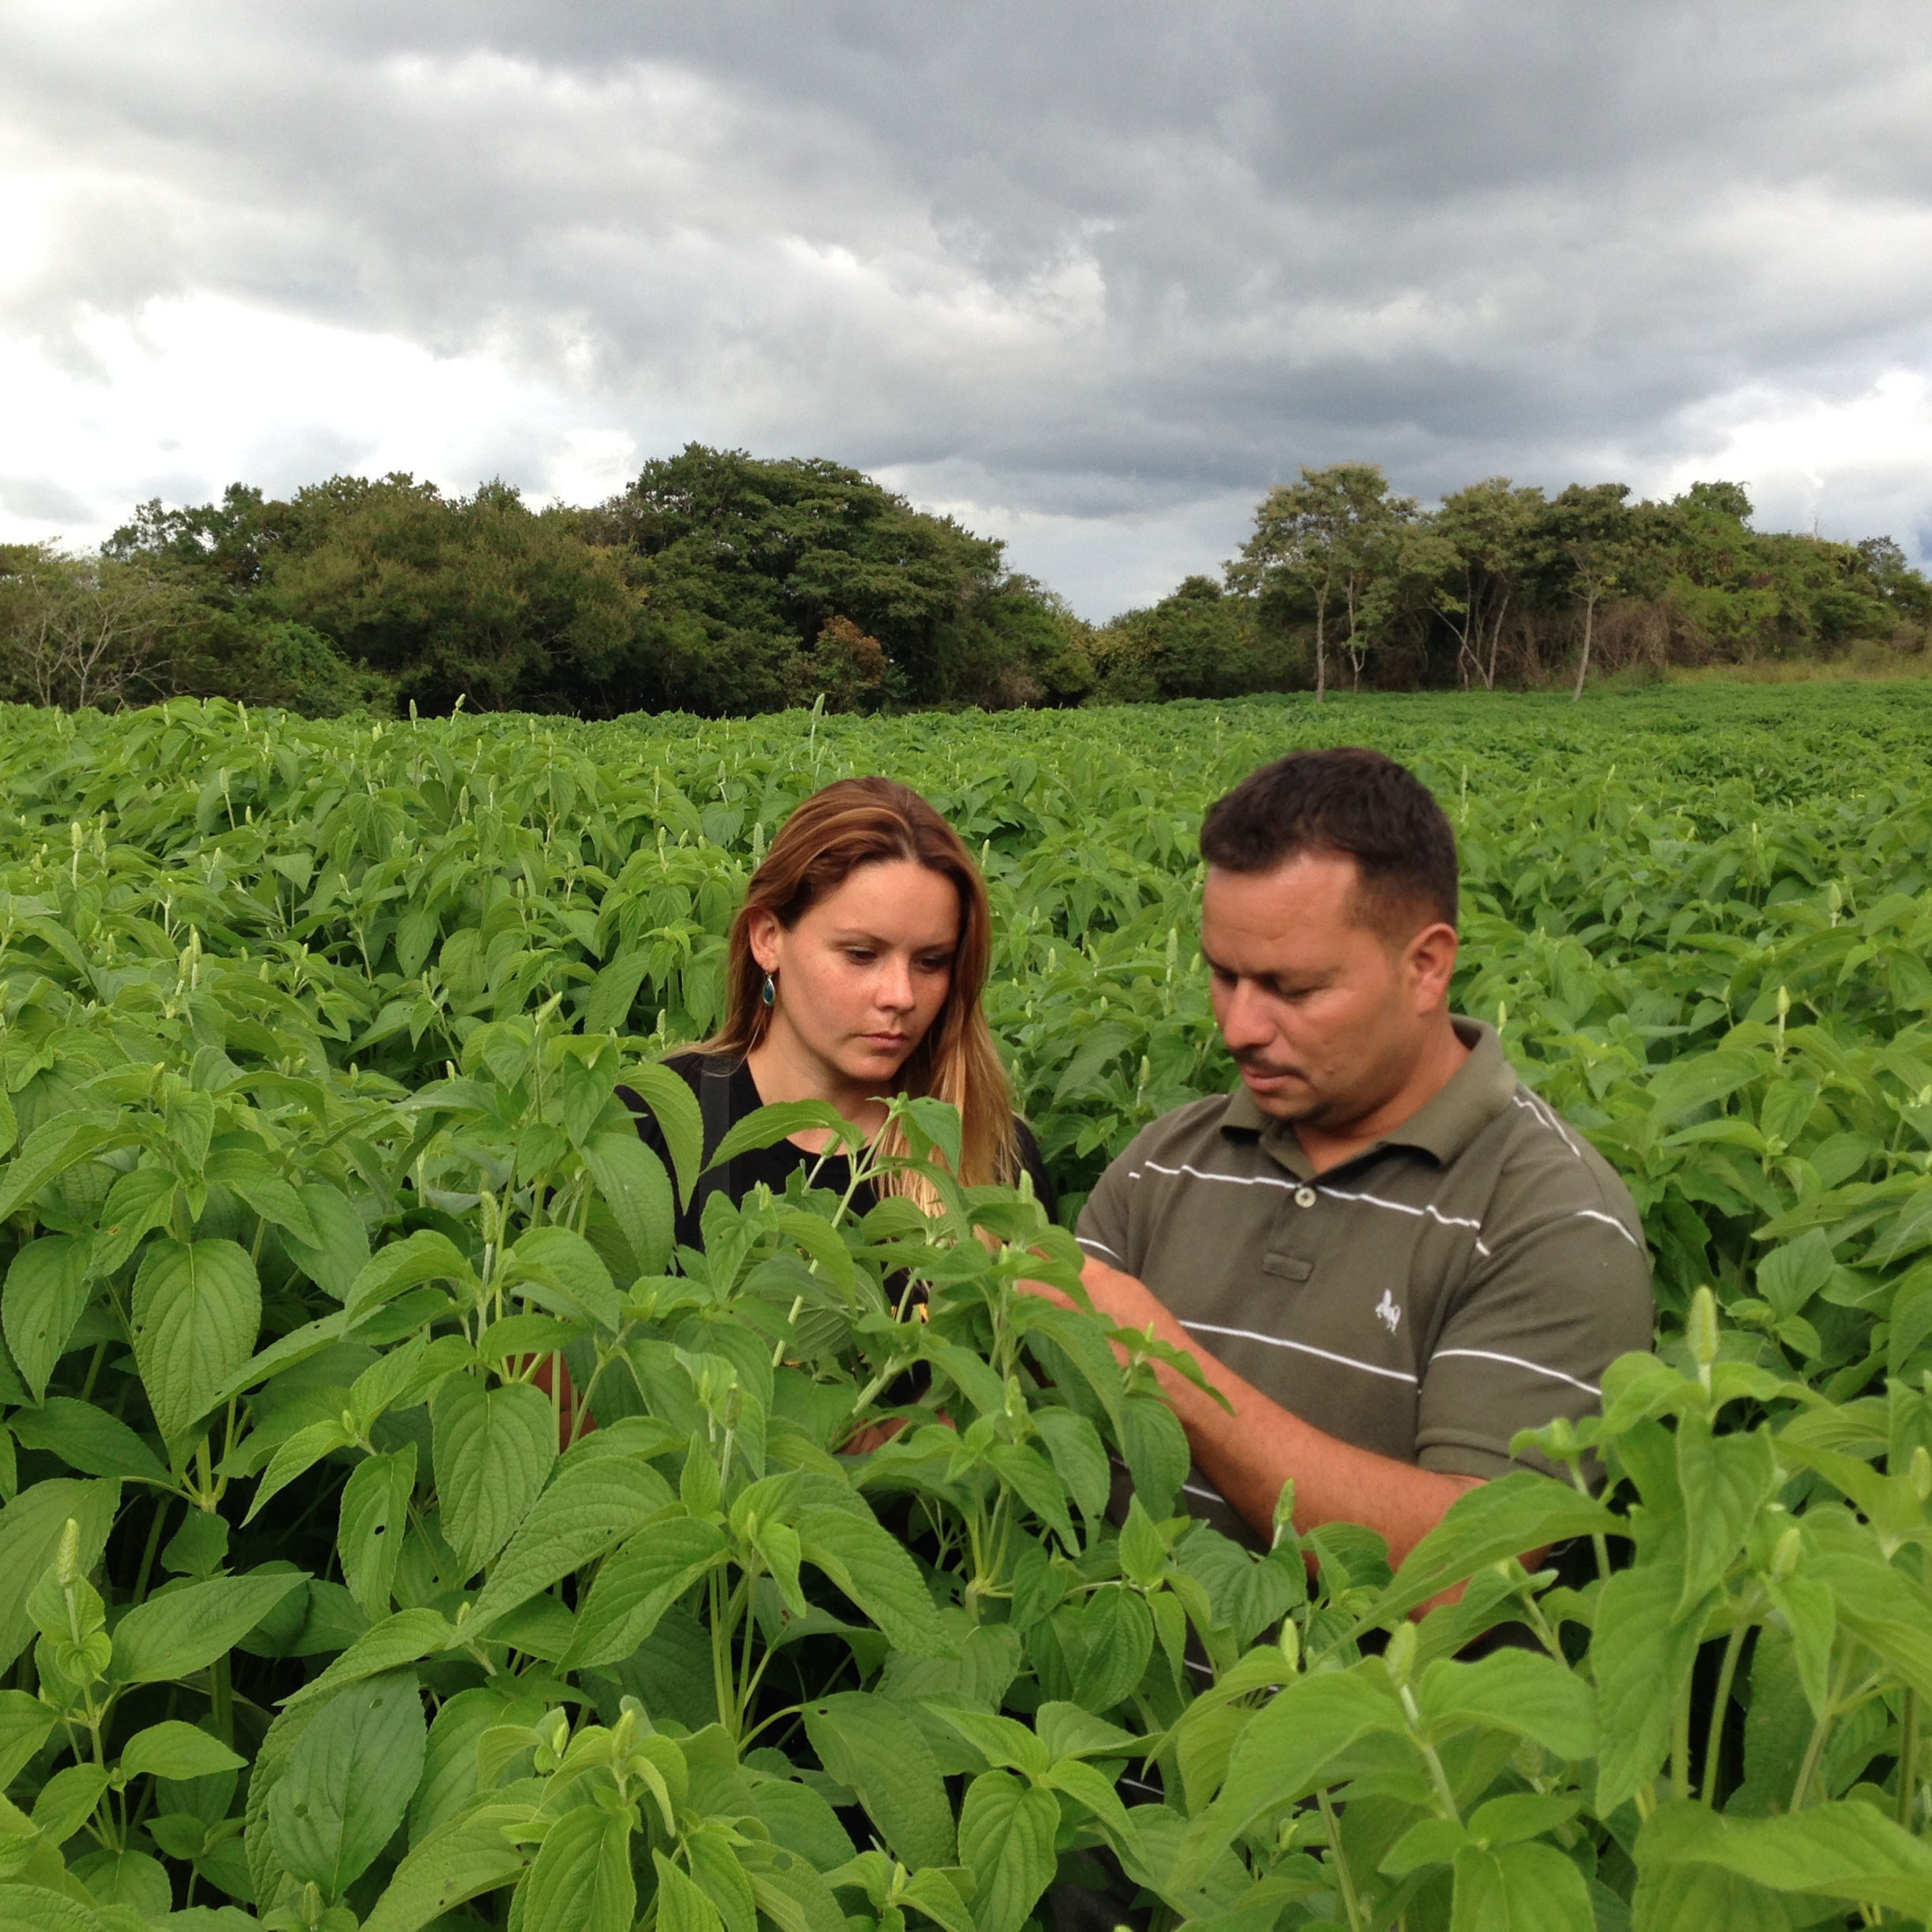 Clartia Butman of Mayorga Coffee with Donald Osorio, an agronomist who is providing technical assistance to the cooperative in Chia. (PRNewsFoto/Mayorga Coffee) (PRNewsFoto/MAYORGA COFFEE)